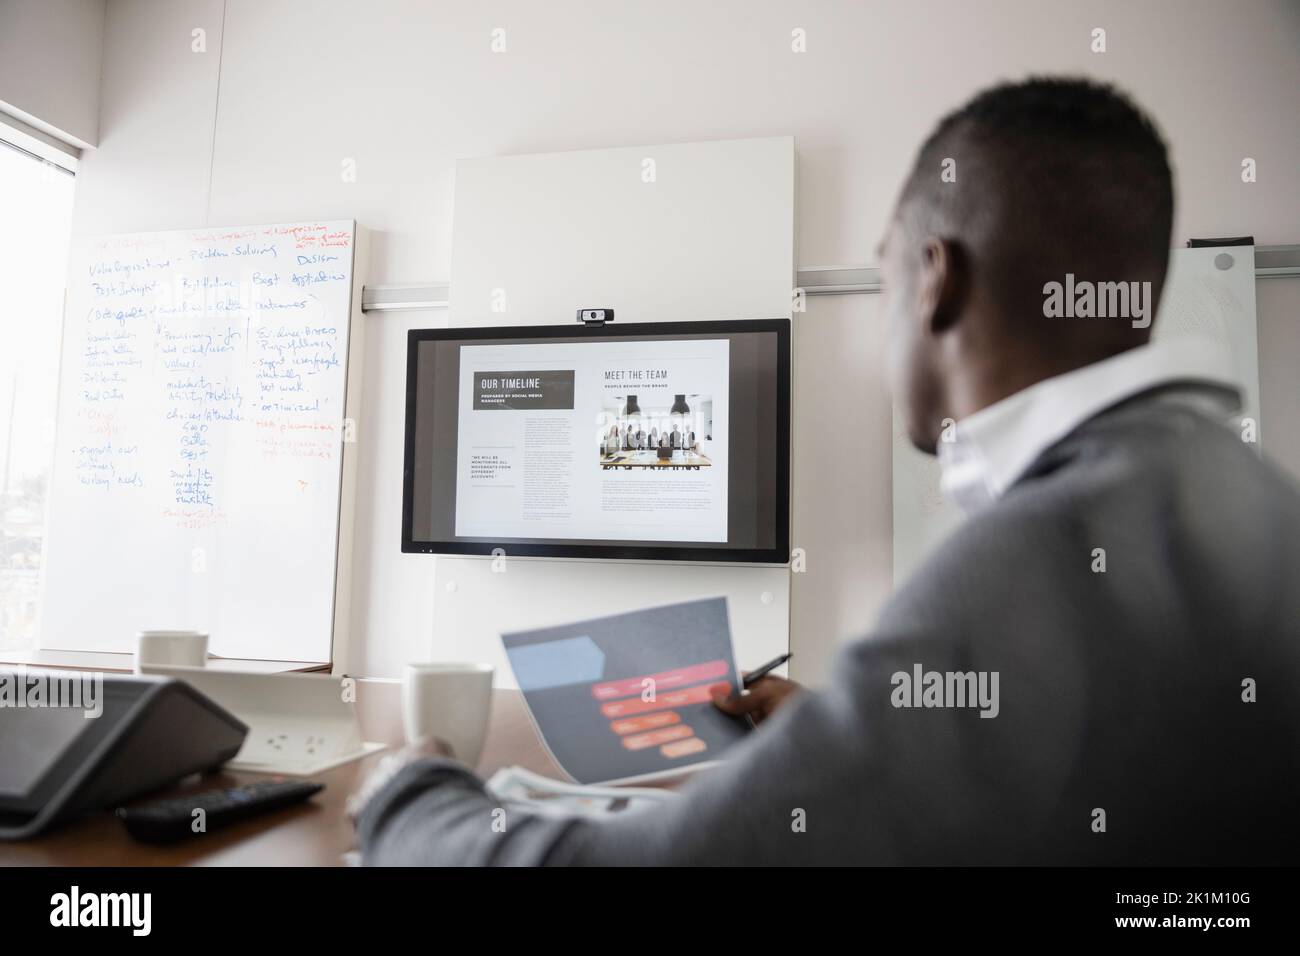 Man looking at screen in meeting room Stock Photo